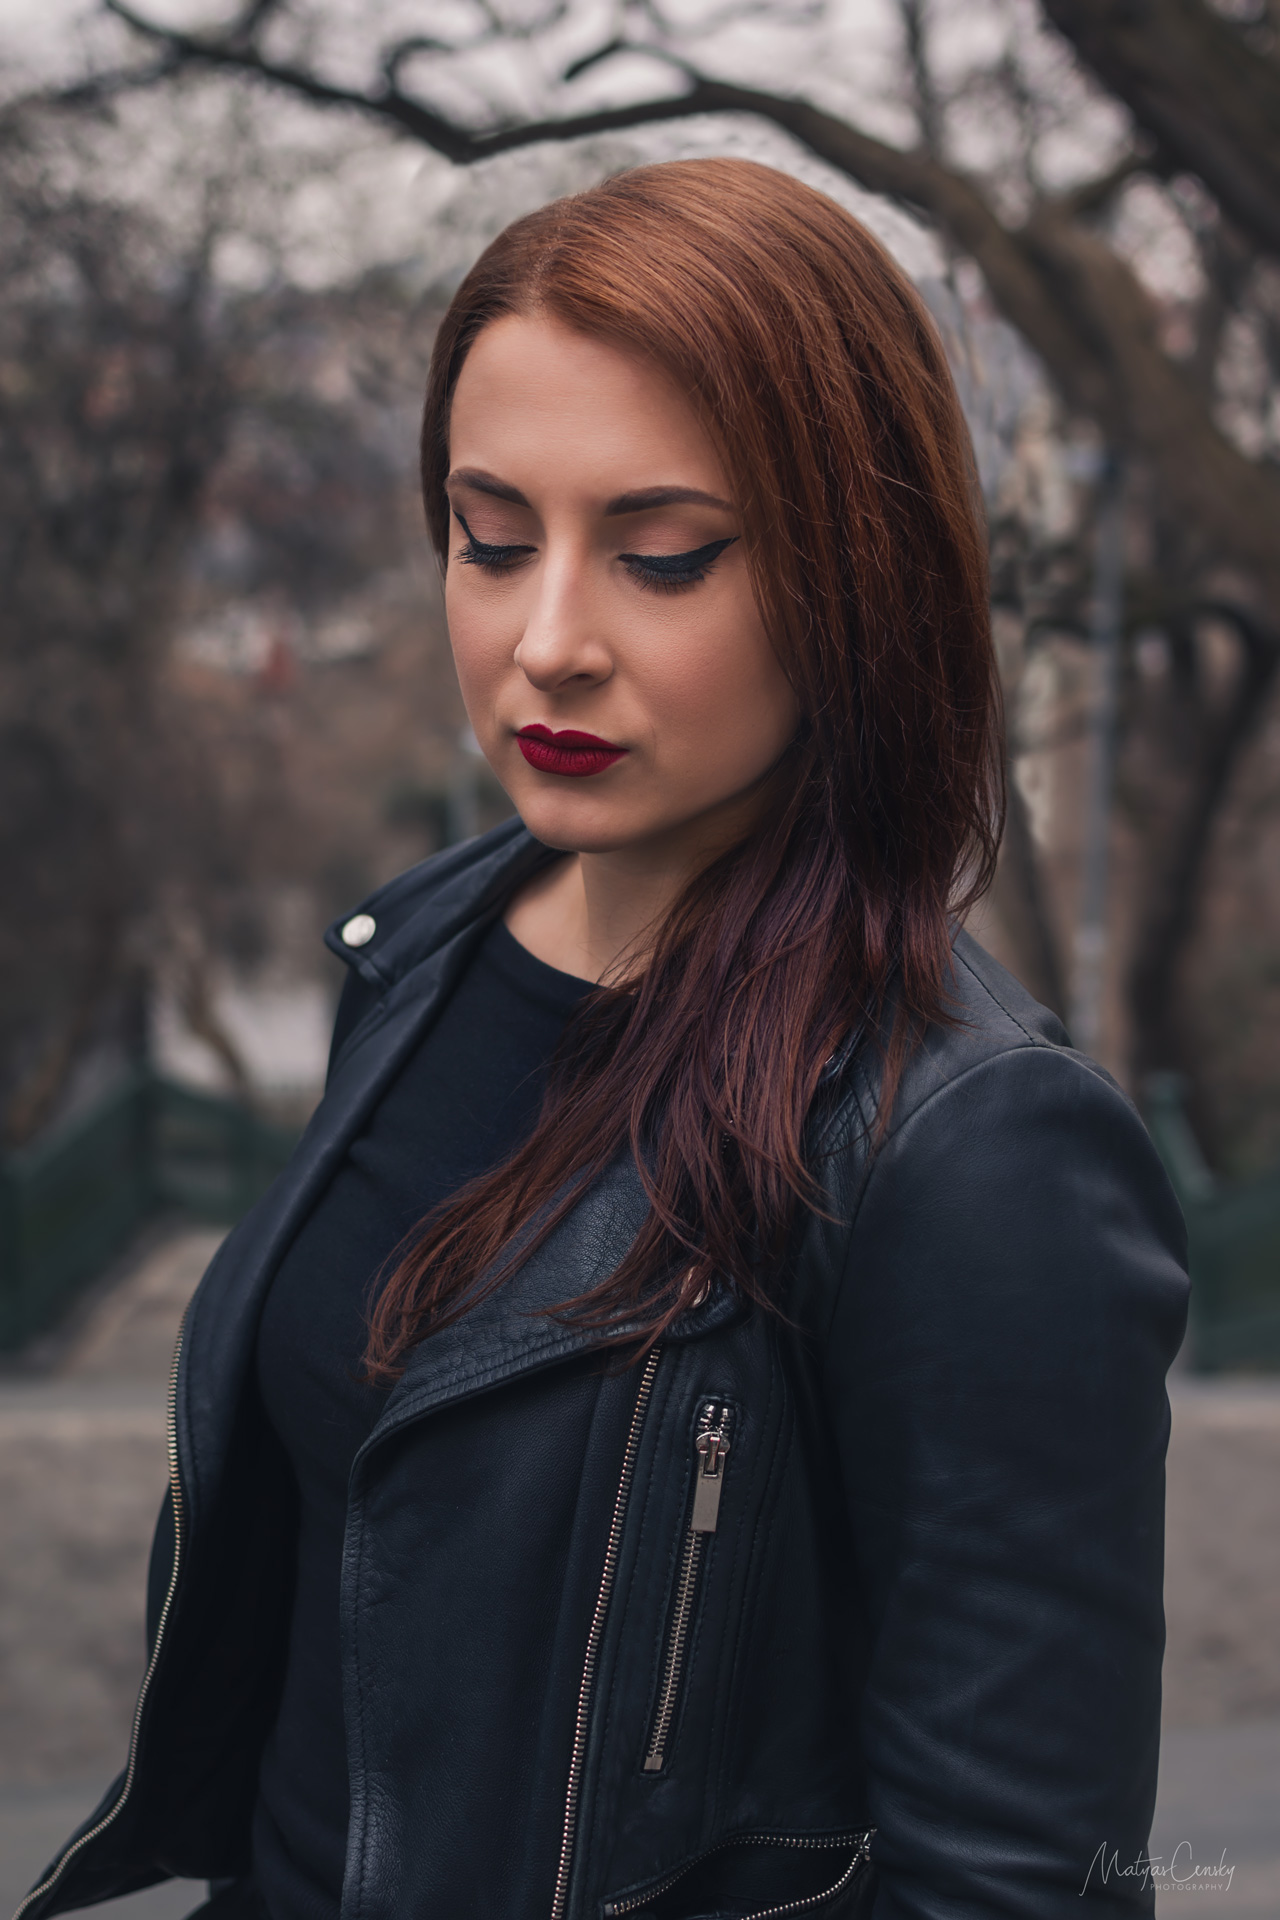 Half body shot of dark red hair women in black leather jacket and red lipstick looking down.